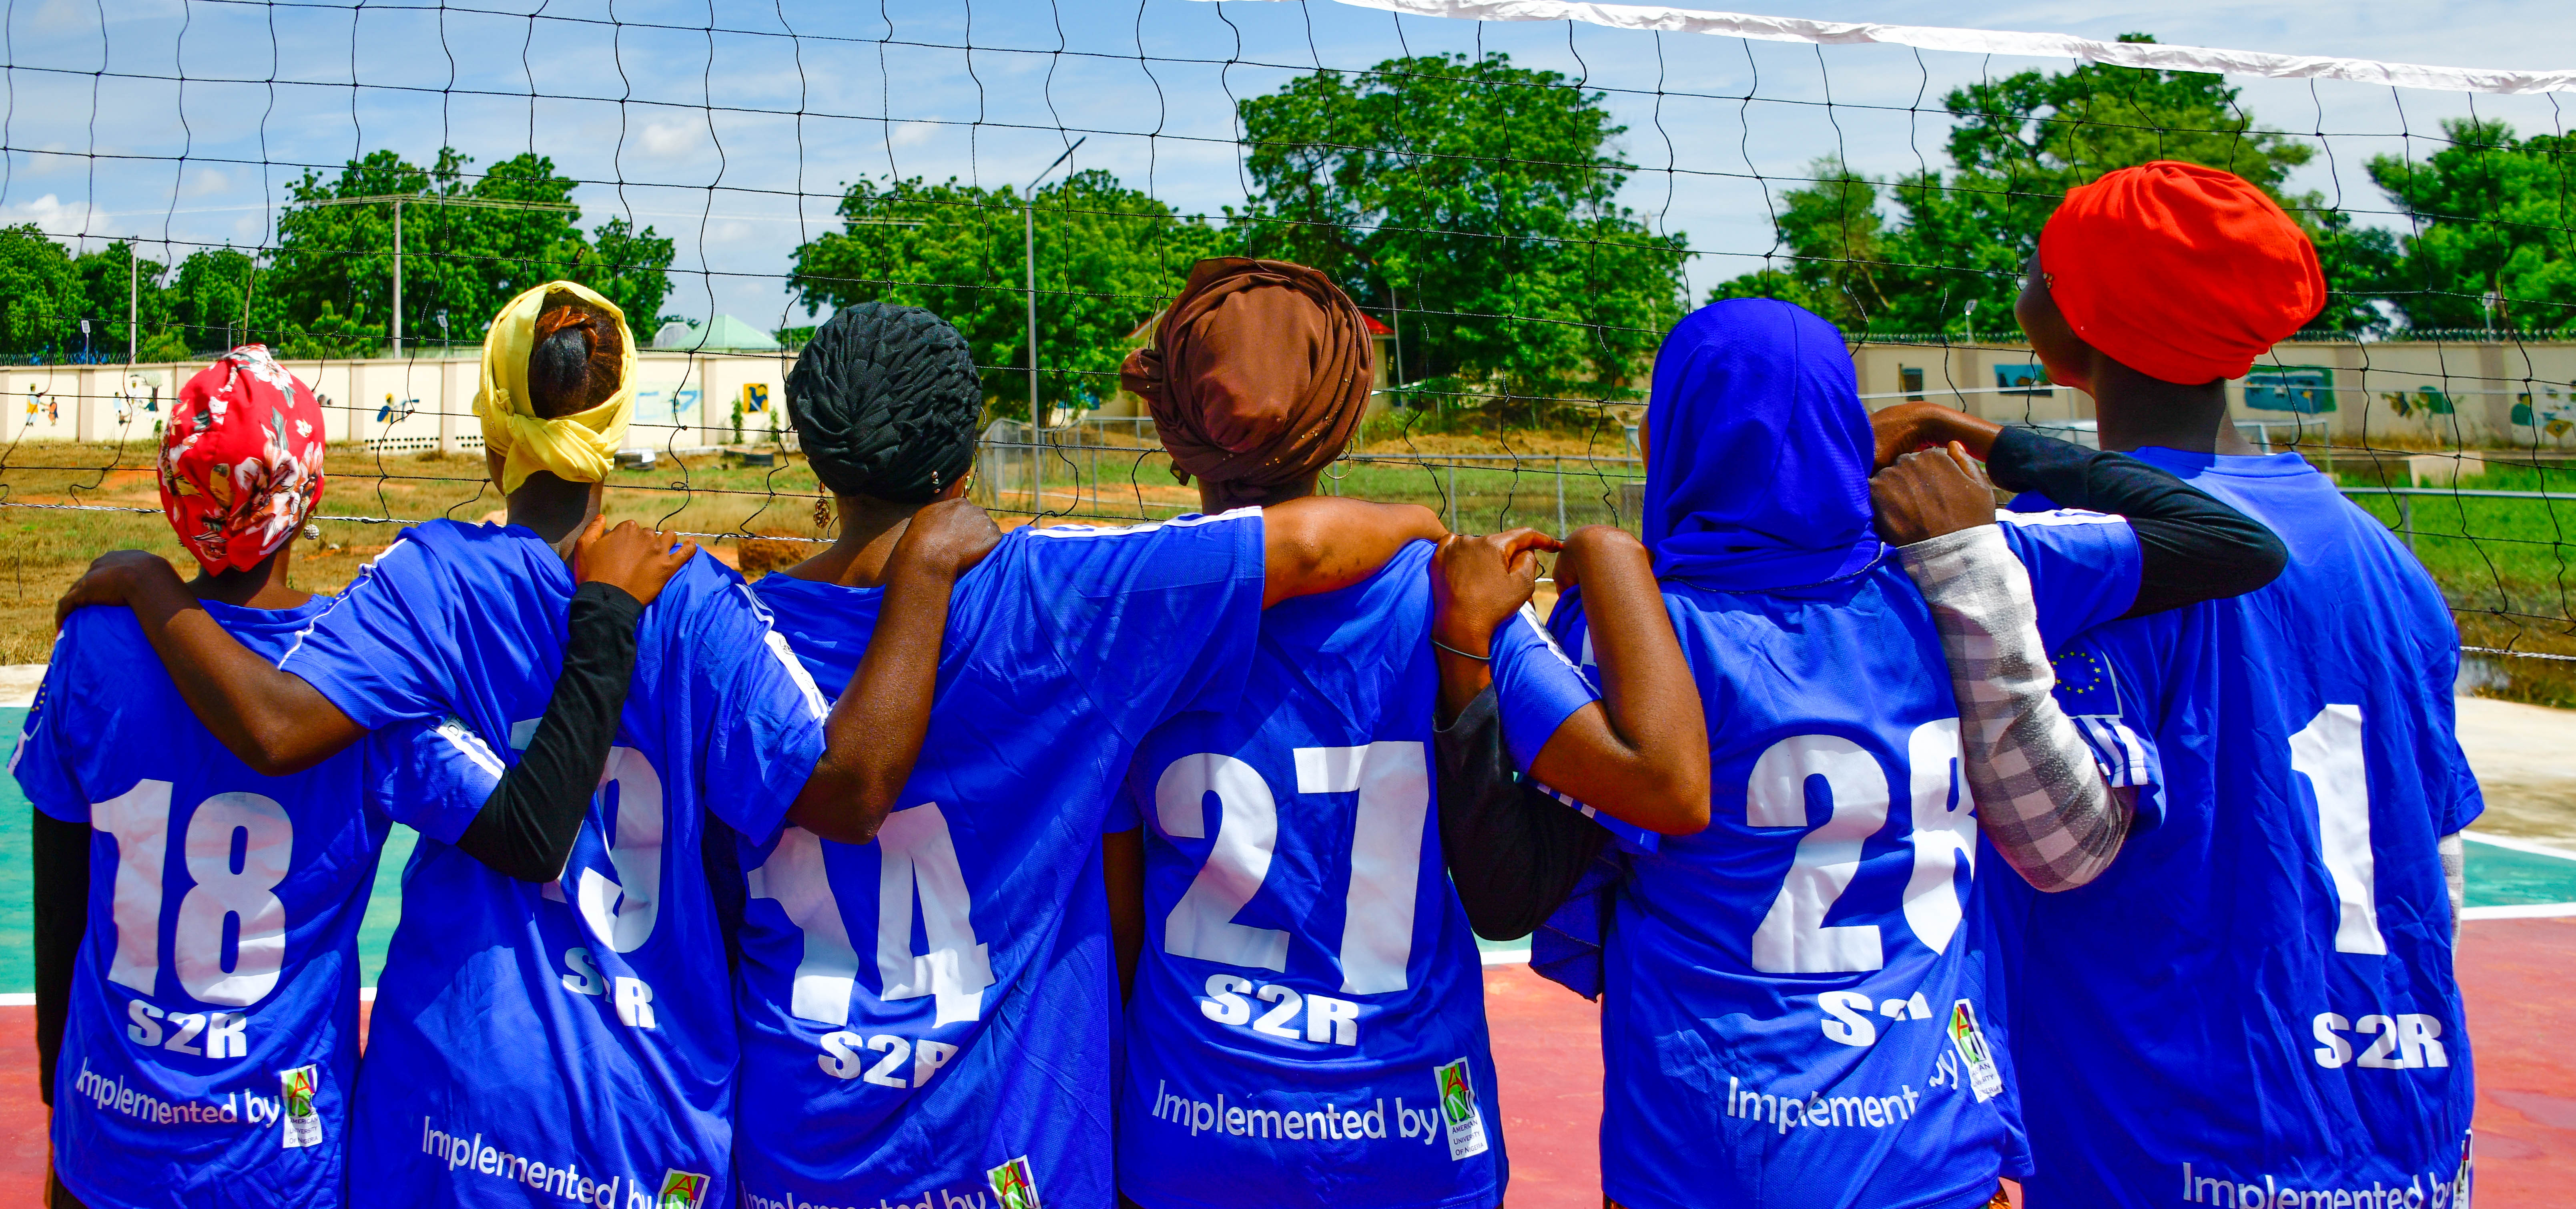 Like men, women are encouraged and supported to participate in sport activities in northeast Nigeria